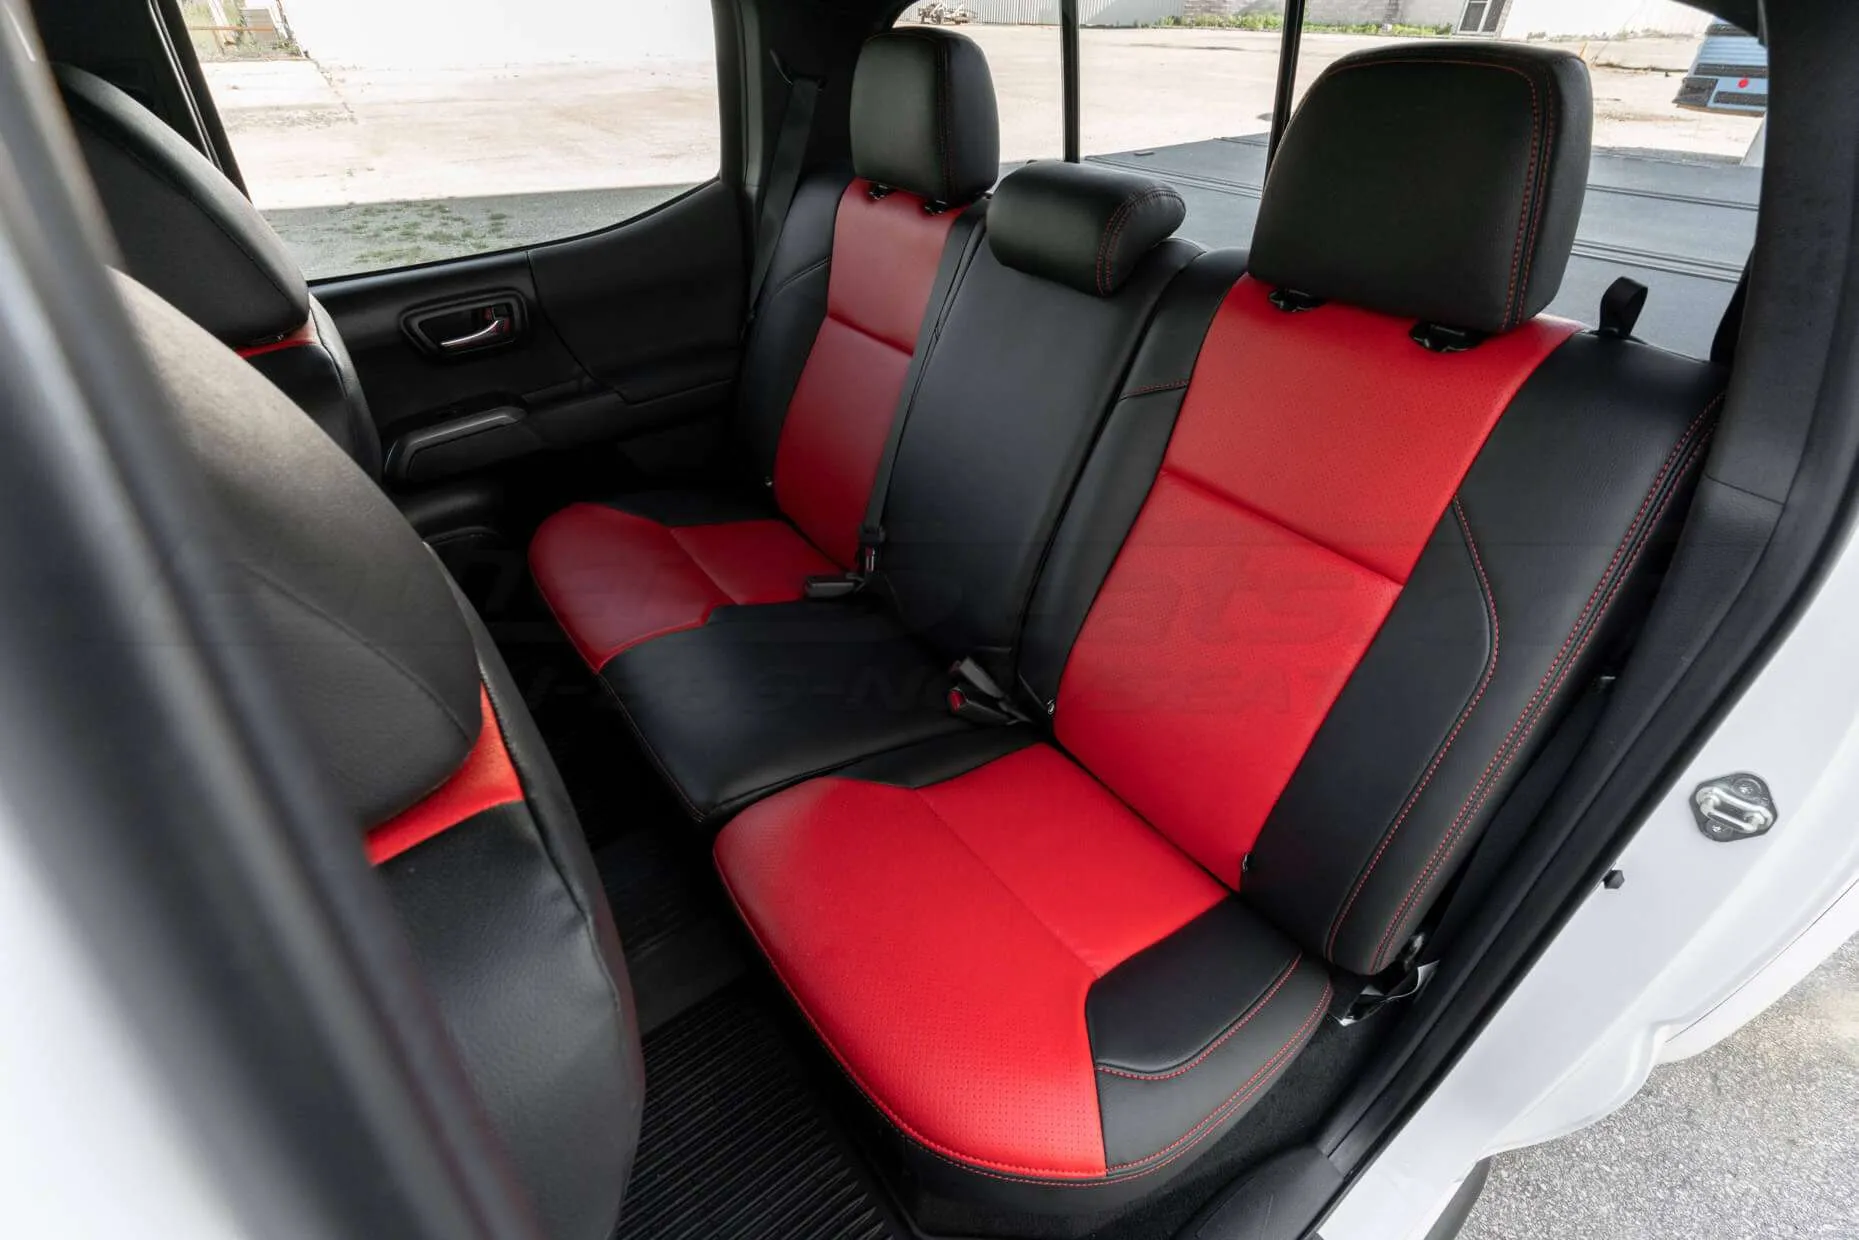 Toyota Tacoma Double Cab leather seats in Black & Bright Red from leatherseats.com